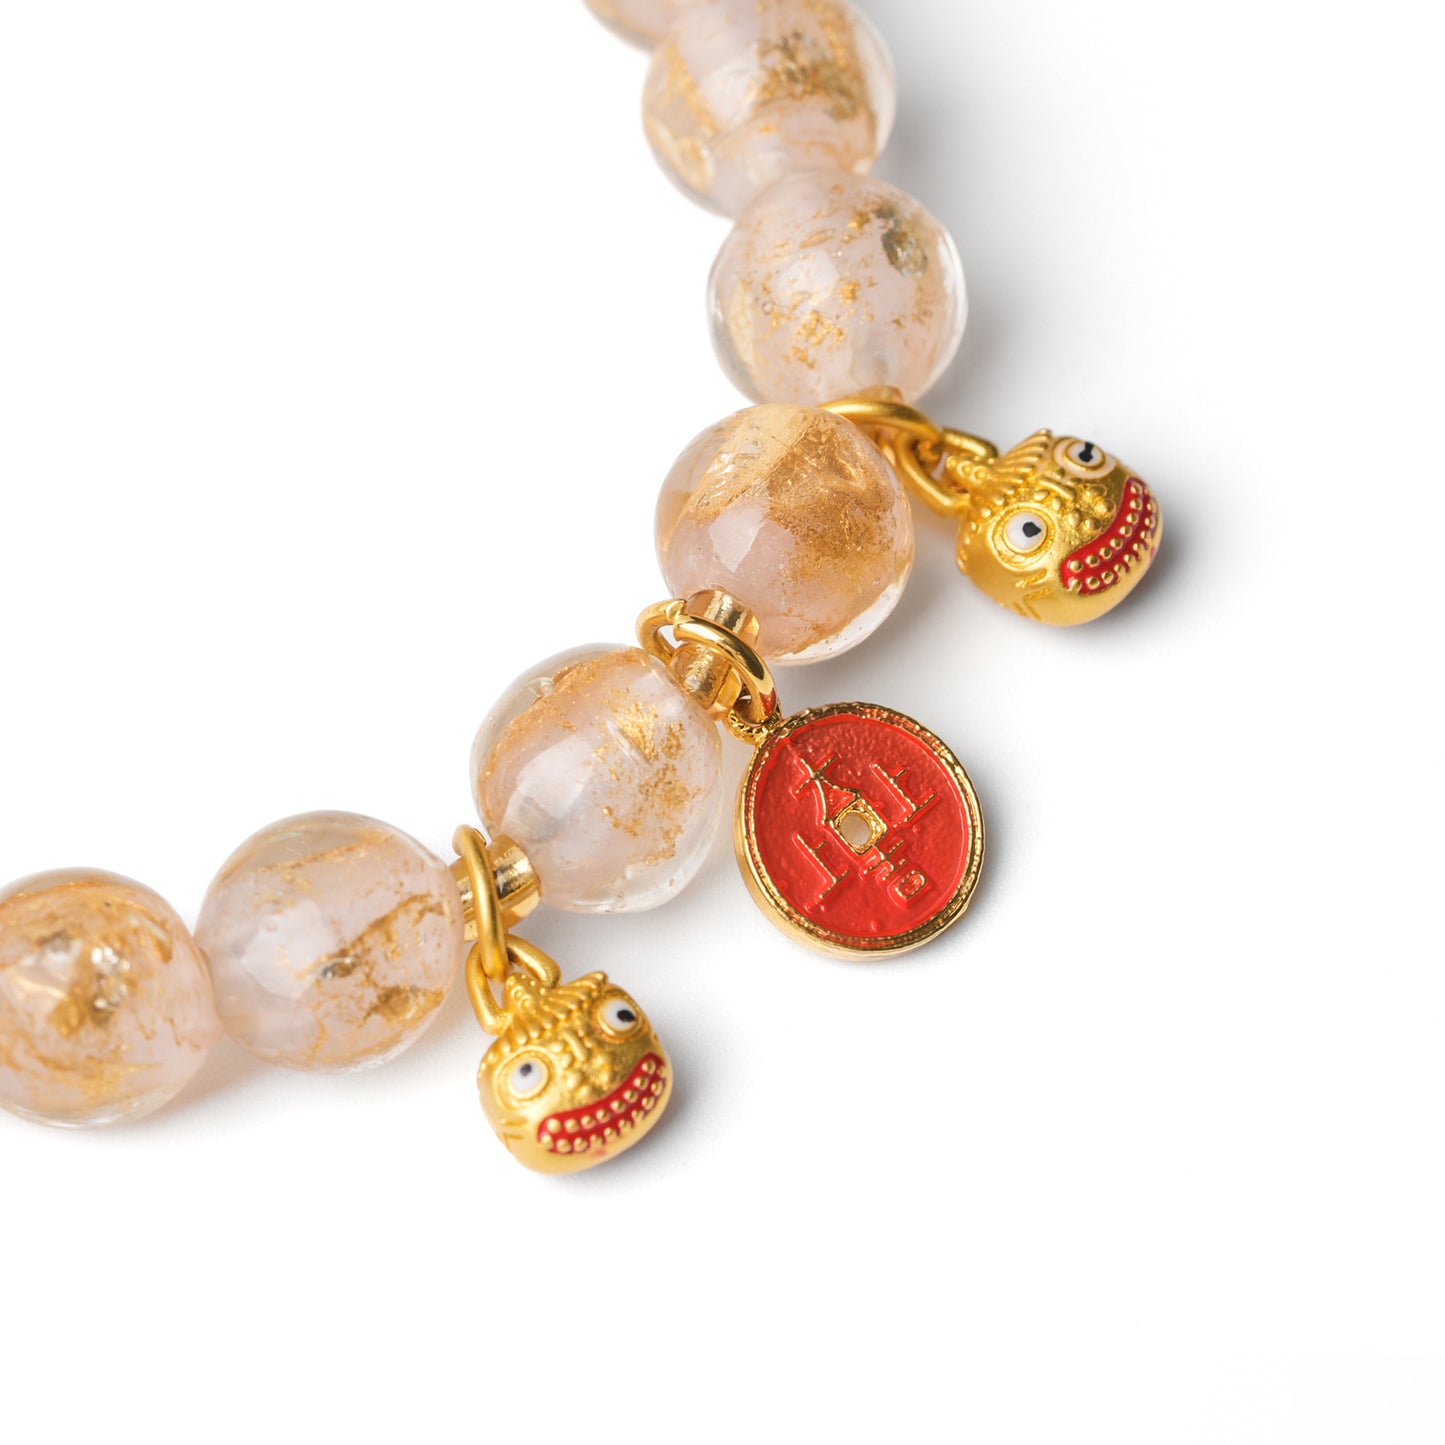 Prosperity and Protection: Gold Foil Incense Ash Bracelet with Pixiu Charm